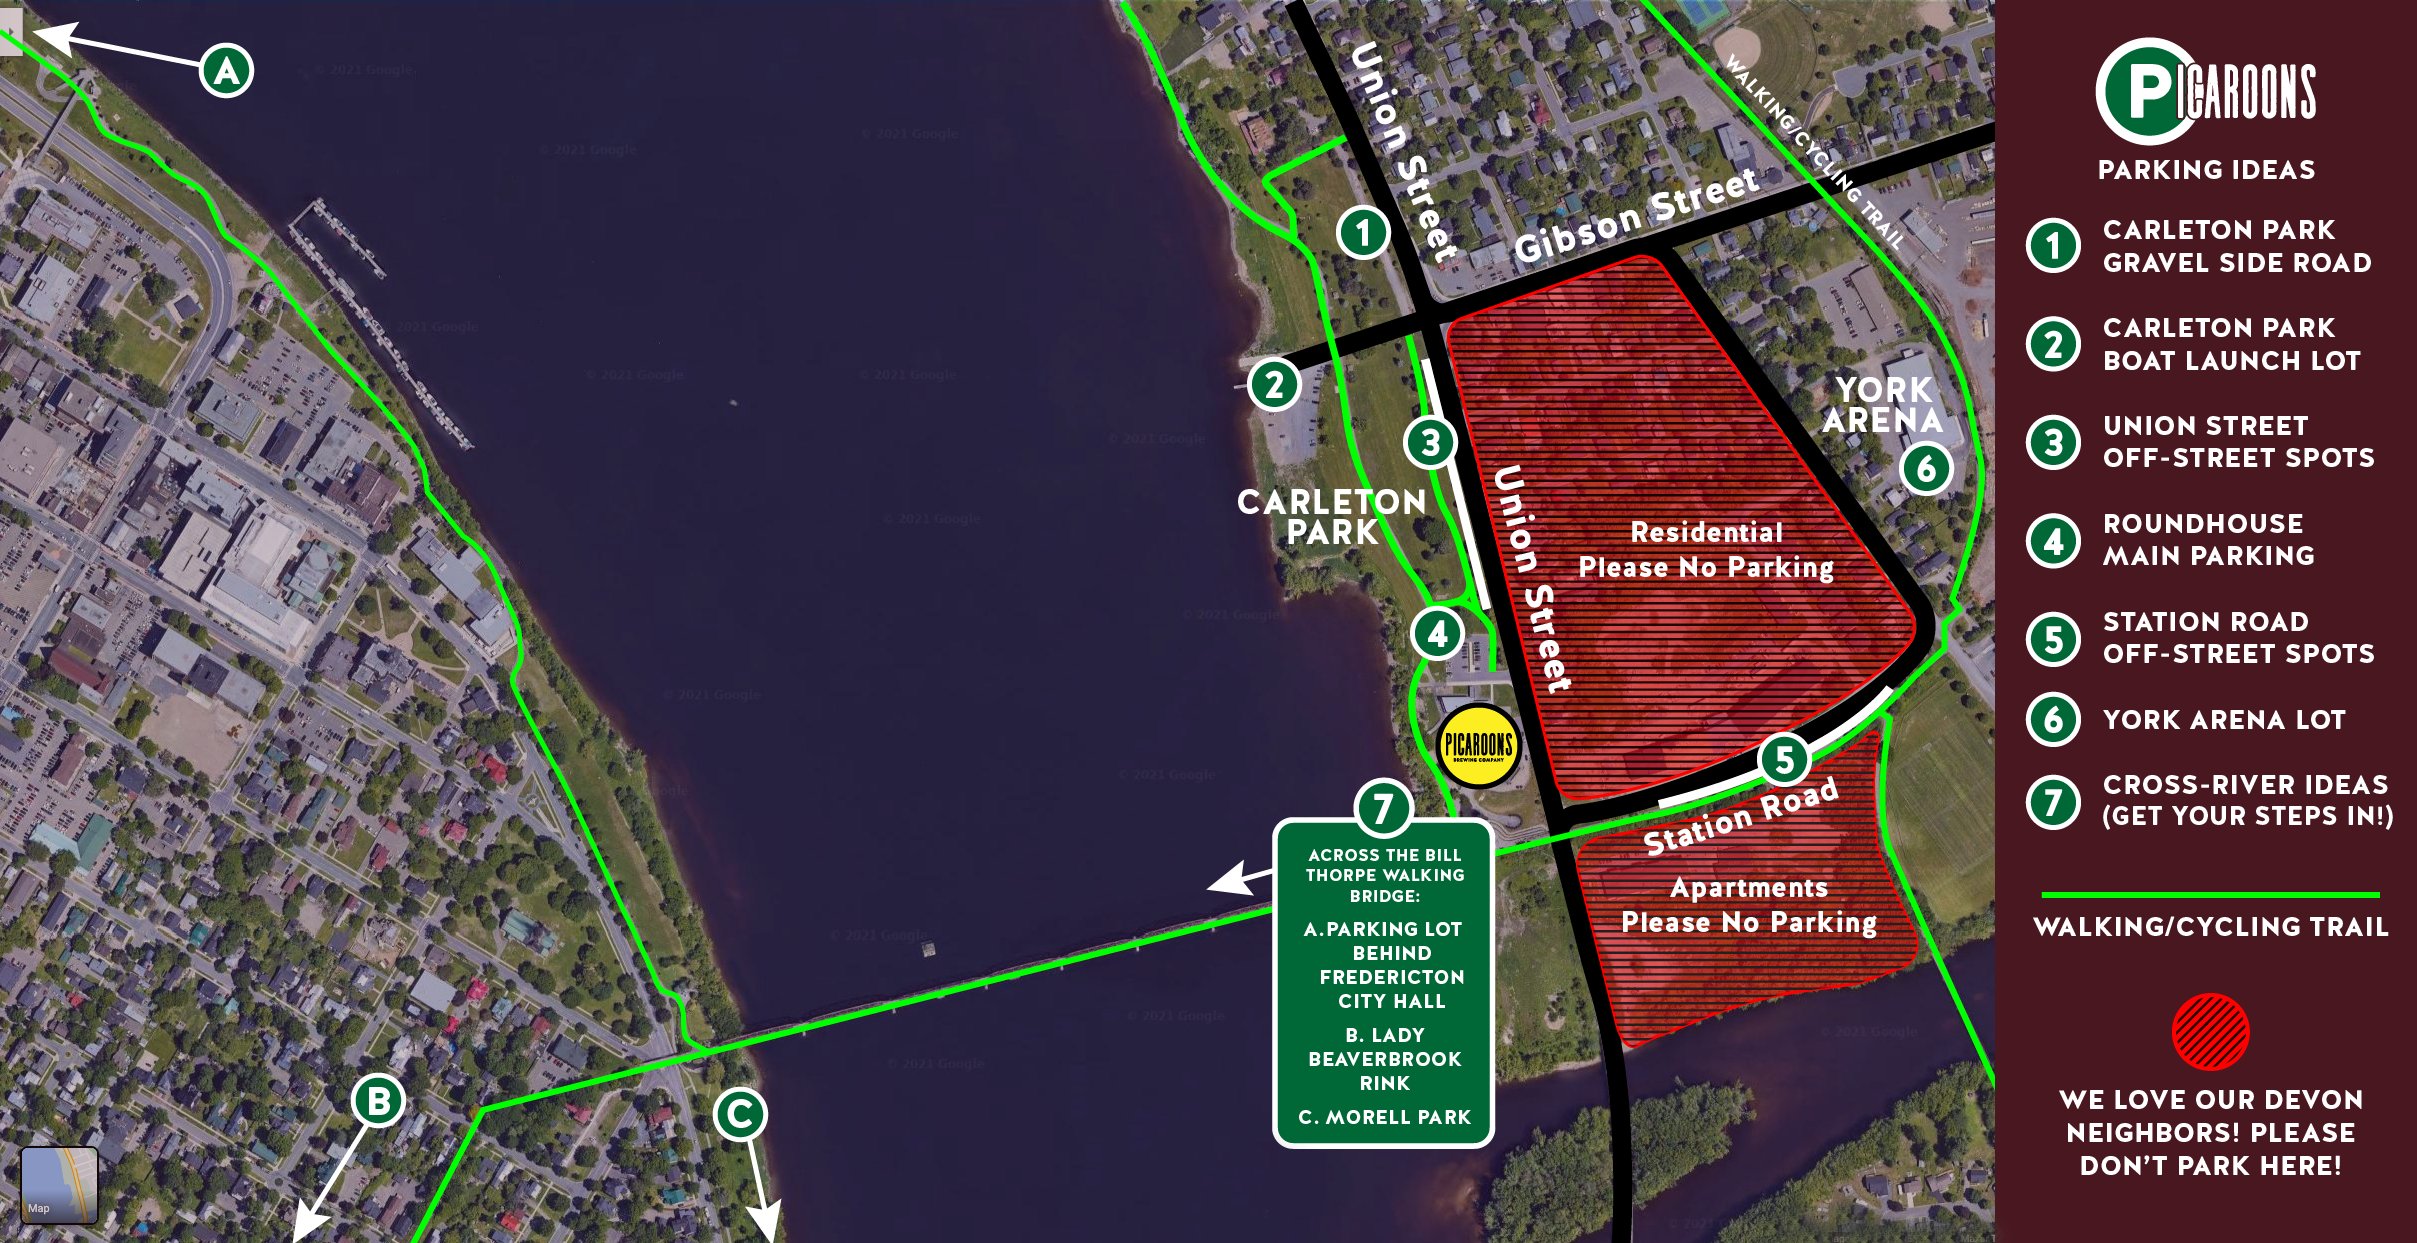 Map Showing Picaroons Parking Options